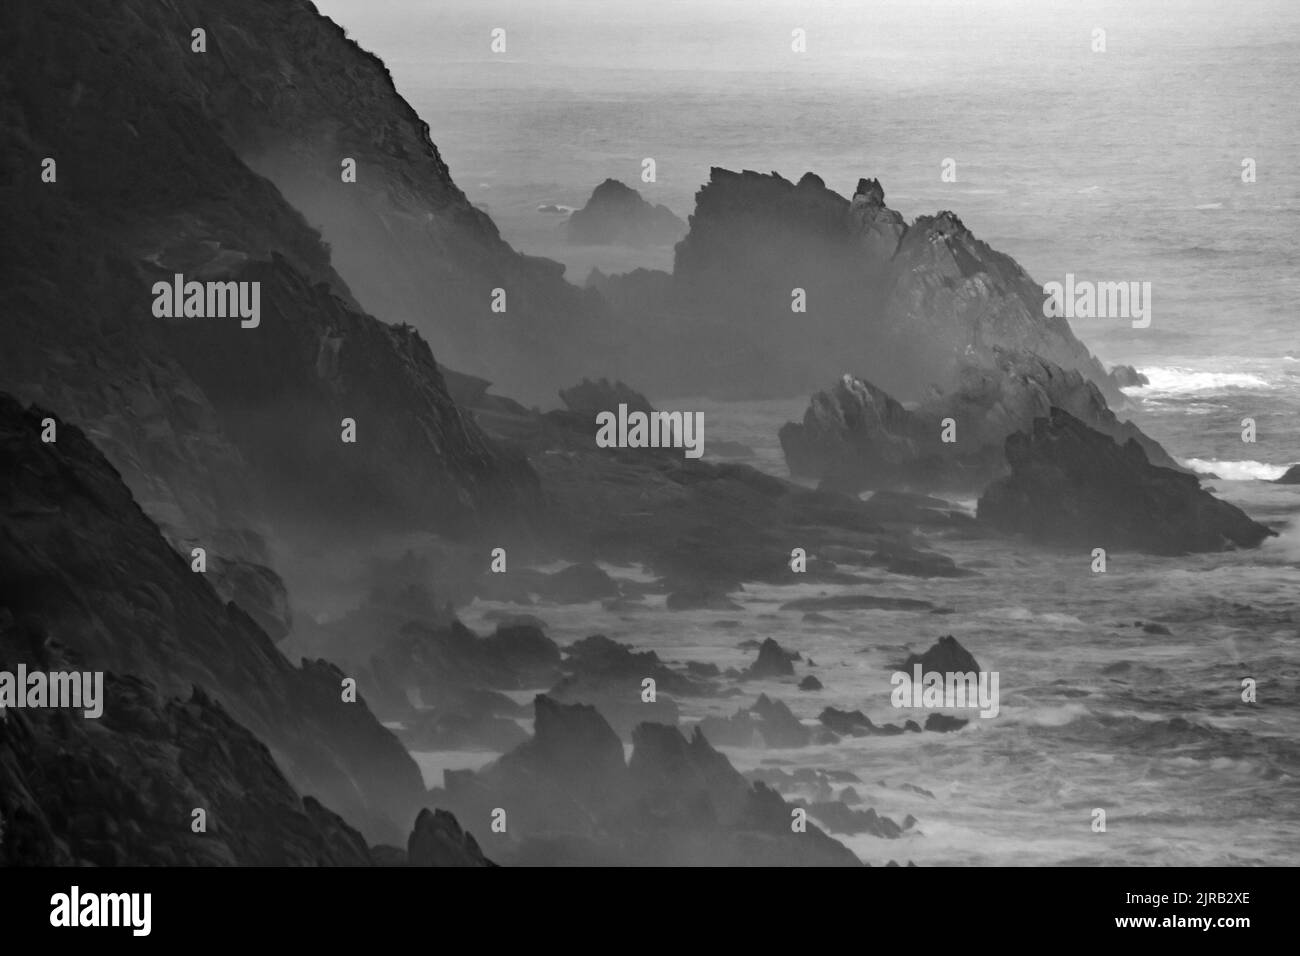 Hazy, Black and white, View along the jagged, seaside cliffs of the Tsitsikamma Mountains. Stock Photo